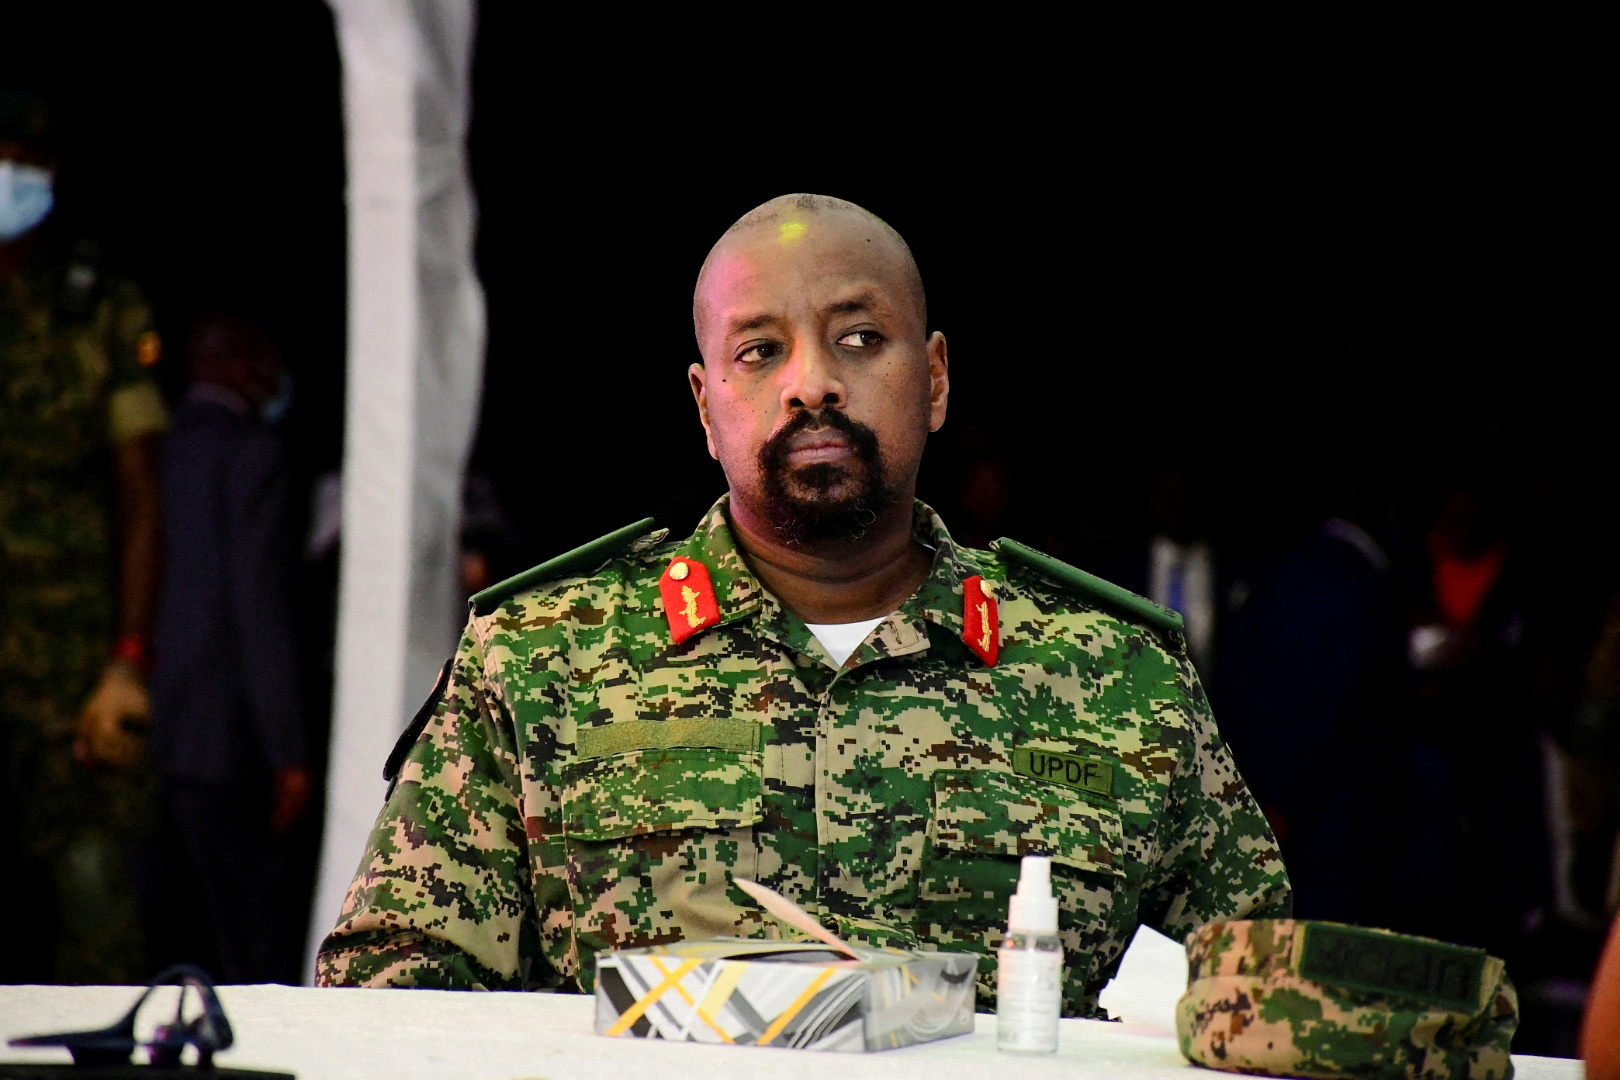 Lt. General Kainerugaba attends his birthday party in Entebbe